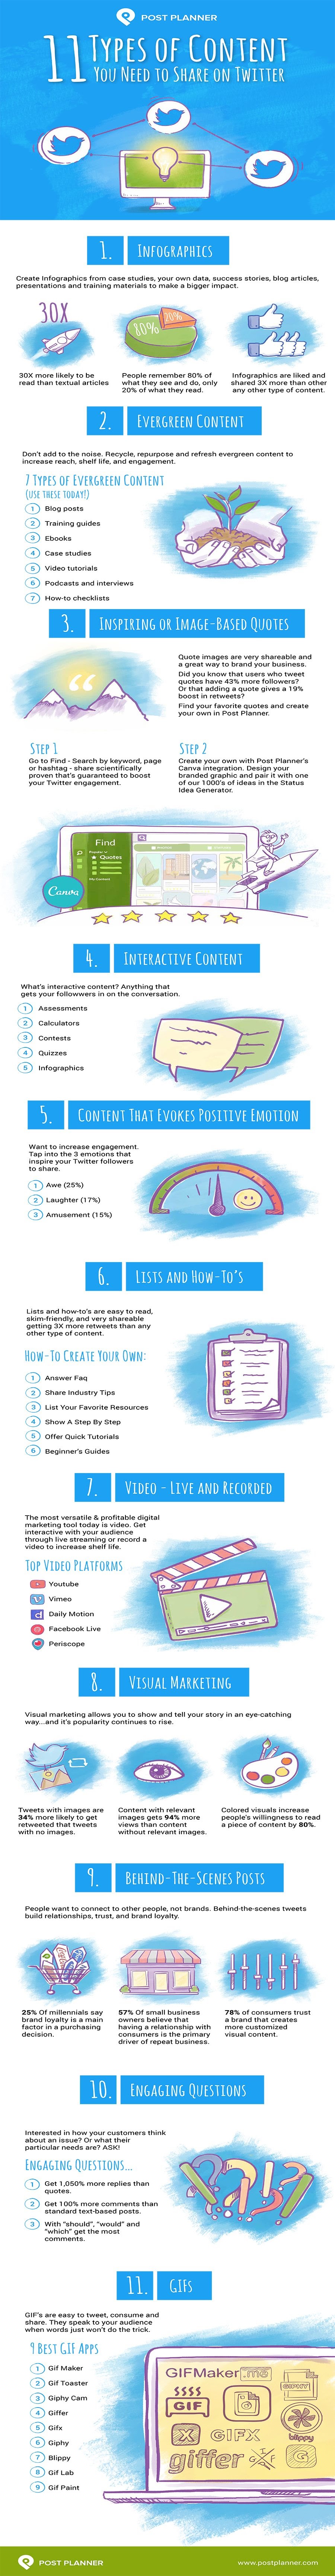 11 Types of Content You Need to Share on Twitter - #Infographic